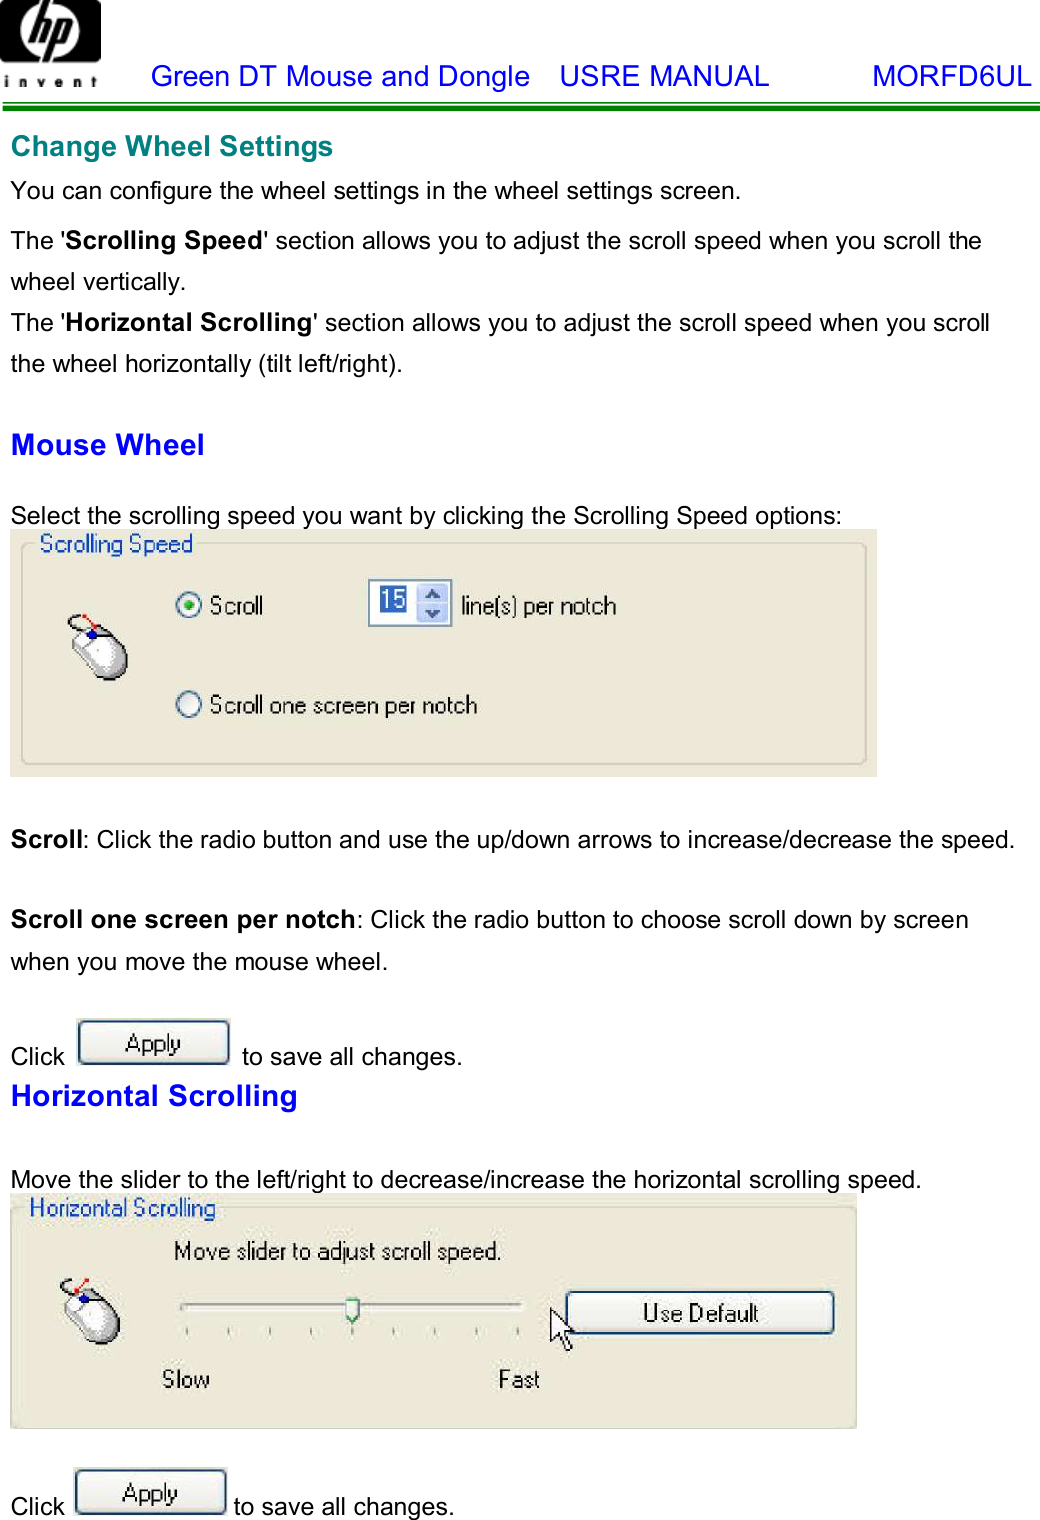    Green DT Mouse and Dongle  USRE MANUAL       MORFD6UL    Change Wheel Settings  You can configure the wheel settings in the wheel settings screen.  The &apos;Scrolling Speed&apos; section allows you to adjust the scroll speed when you scroll the wheel vertically. The &apos;Horizontal Scrolling&apos; section allows you to adjust the scroll speed when you scroll  the wheel horizontally (tilt left/right).  Mouse Wheel   Select the scrolling speed you want by clicking the Scrolling Speed options:    Scroll: Click the radio button and use the up/down arrows to increase/decrease the speed.   Scroll one screen per notch: Click the radio button to choose scroll down by screen when you move the mouse wheel.  Click   to save all changes. Horizontal Scrolling   Move the slider to the left/right to decrease/increase the horizontal scrolling speed.     Click  to save all changes.  